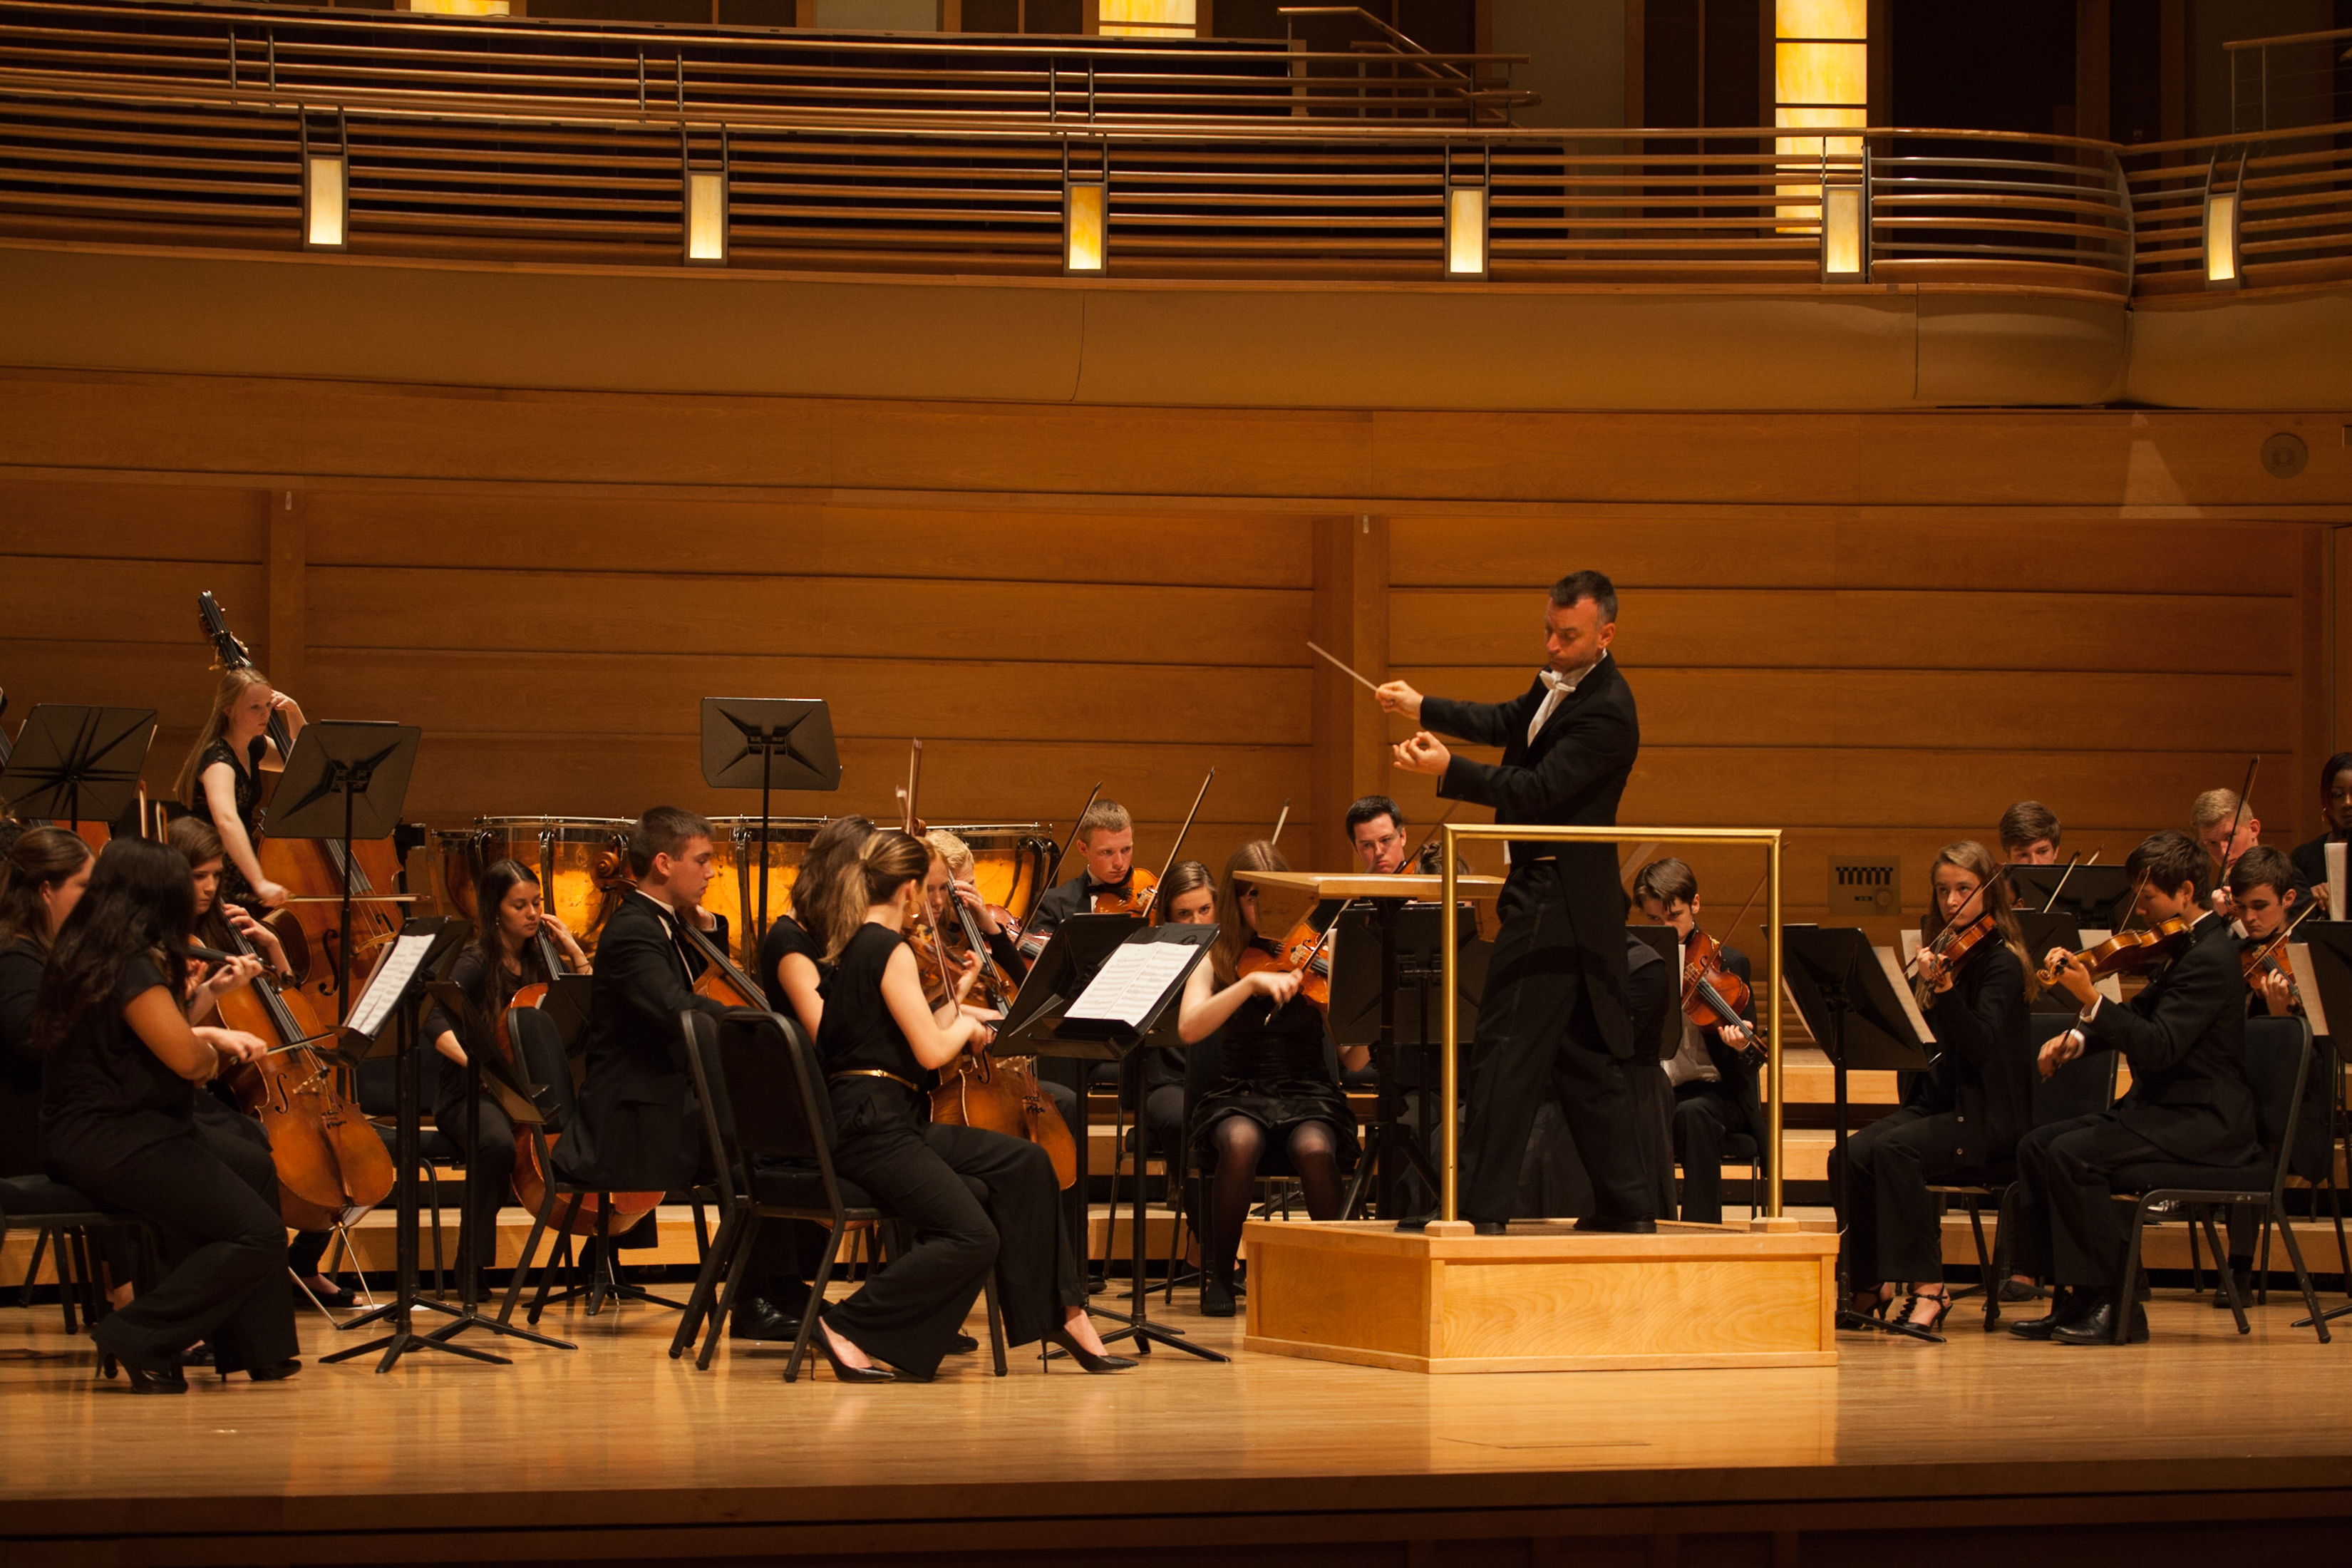 orchestra ensemble performing onstage Festival of Gold